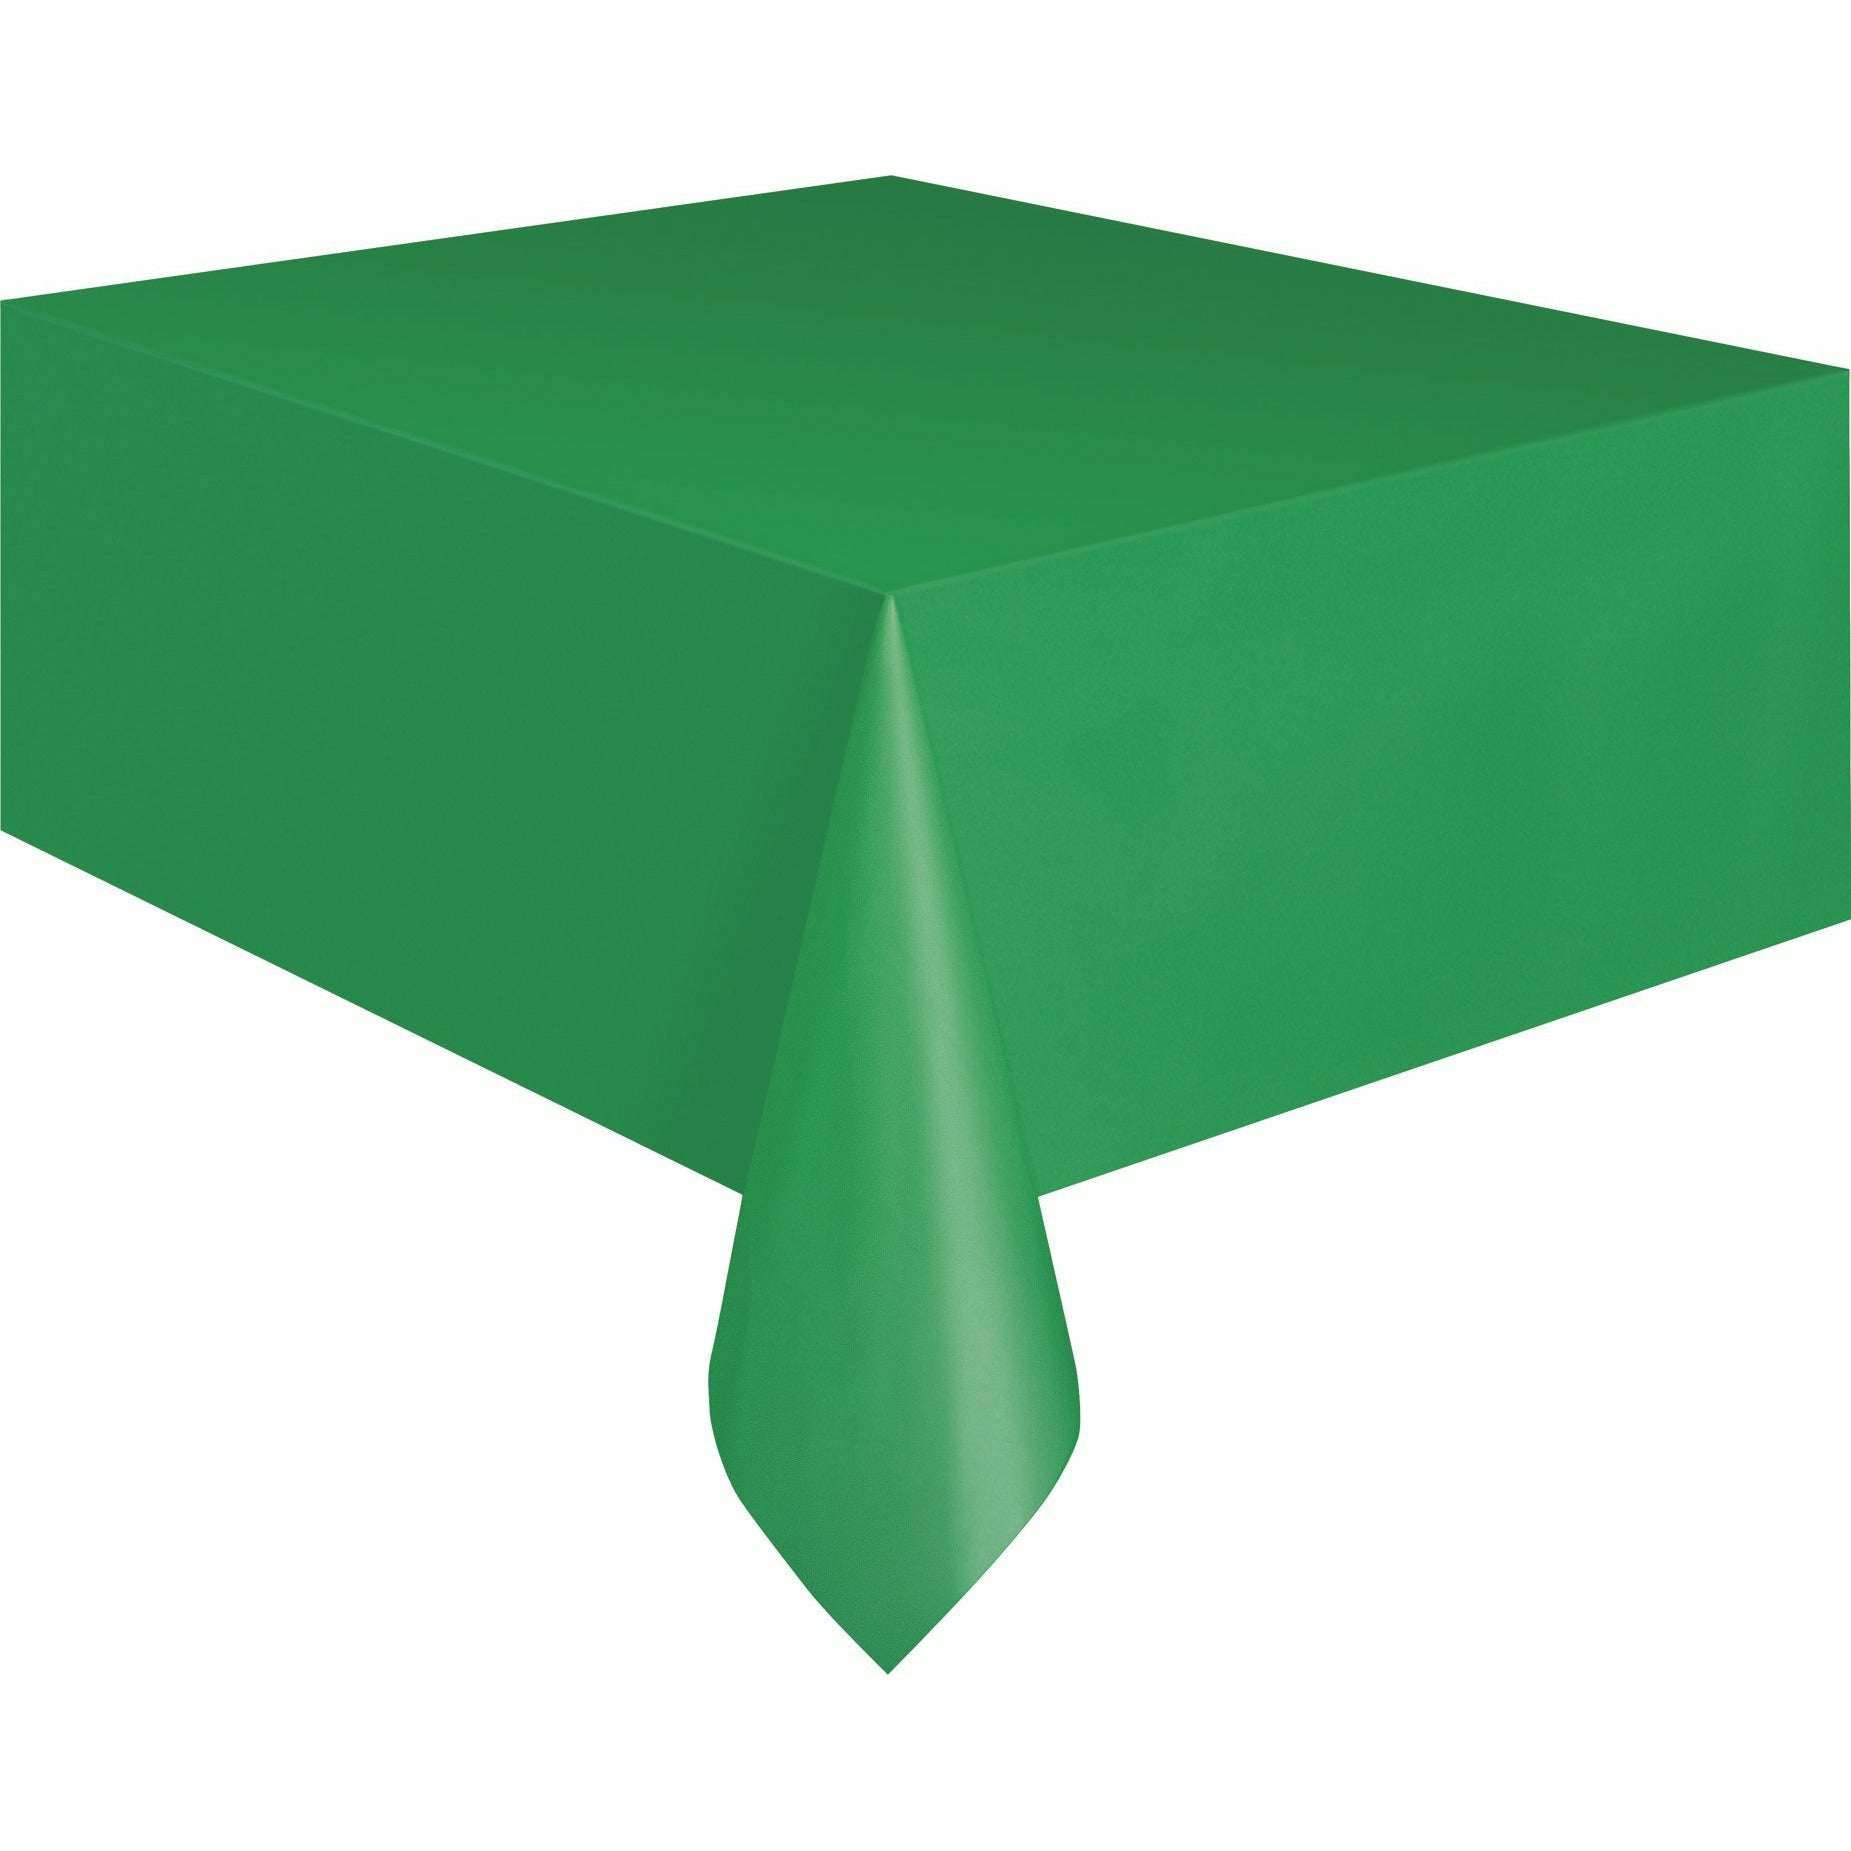 Plastic Tablecover - Emerald Green - Dollars and Sense